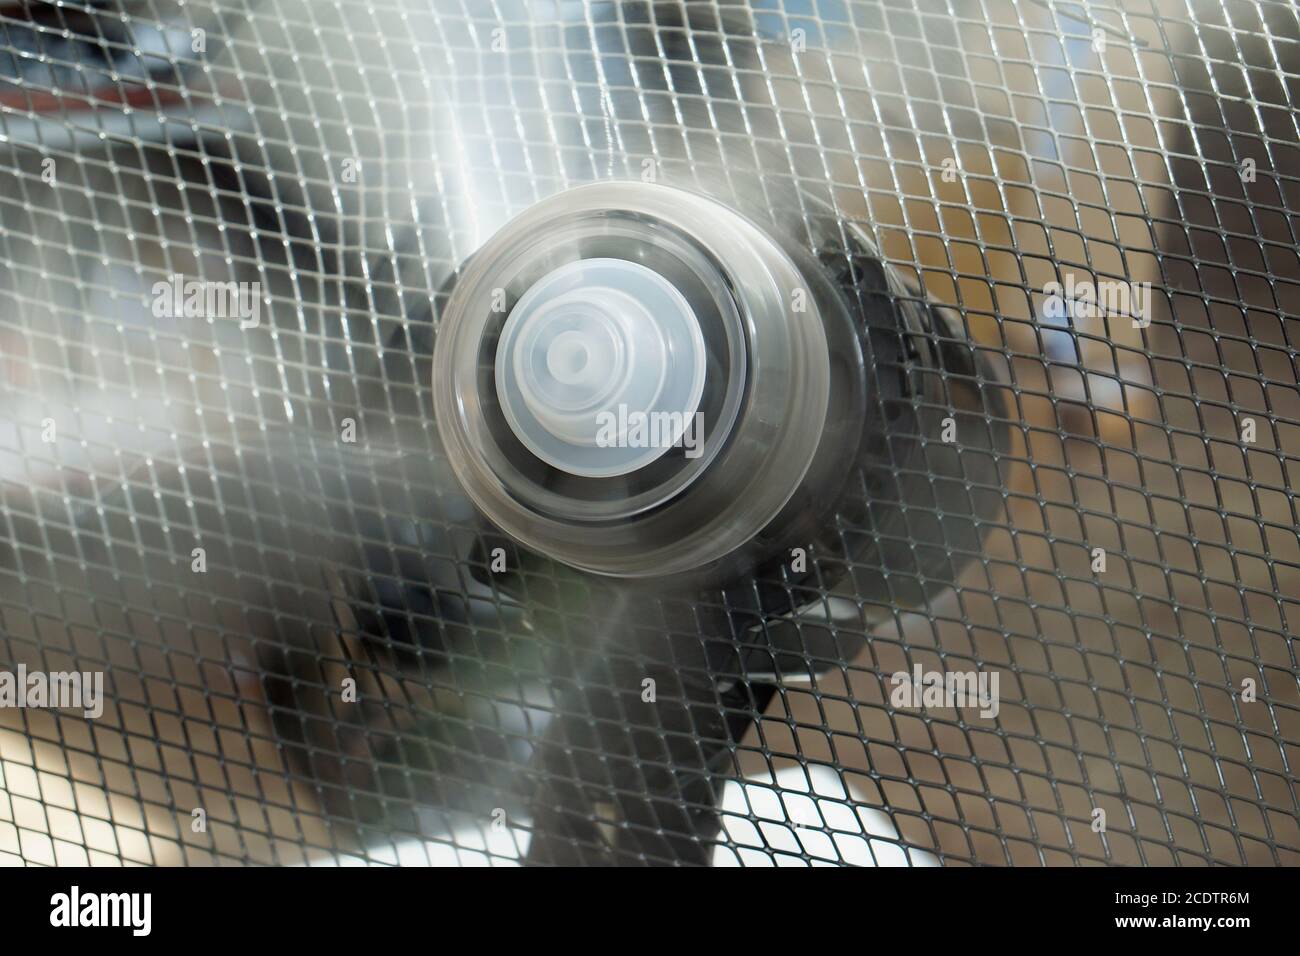 The blades of the home fan rotate at a mad speed Stock Photo